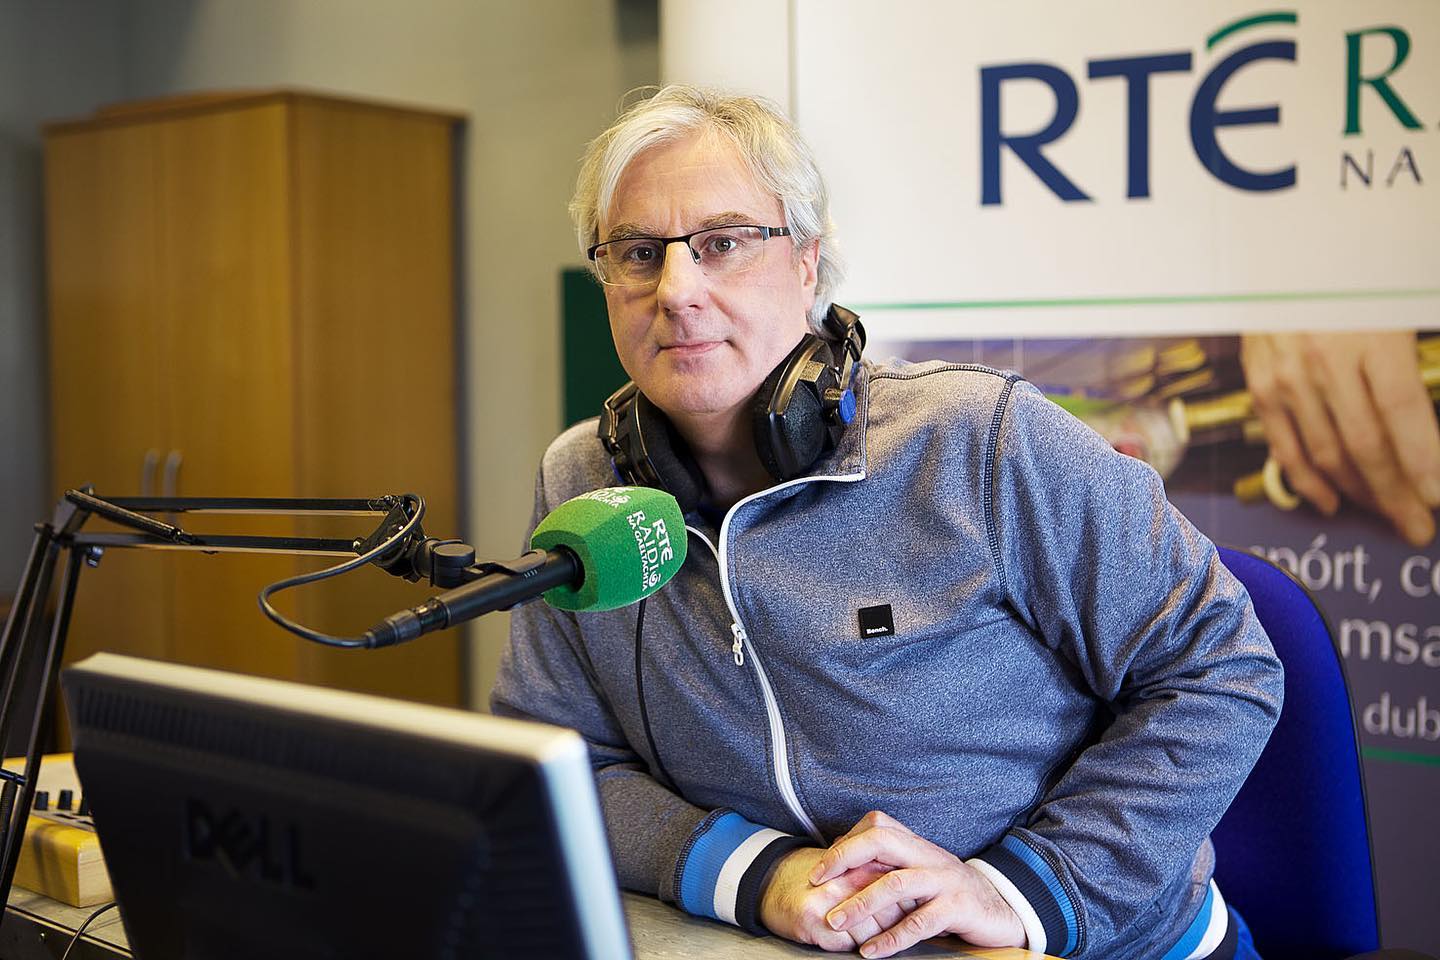  A fundraiser has been launched for renowned broadcaster and journalist Rónán Mac Aodha Bhuí